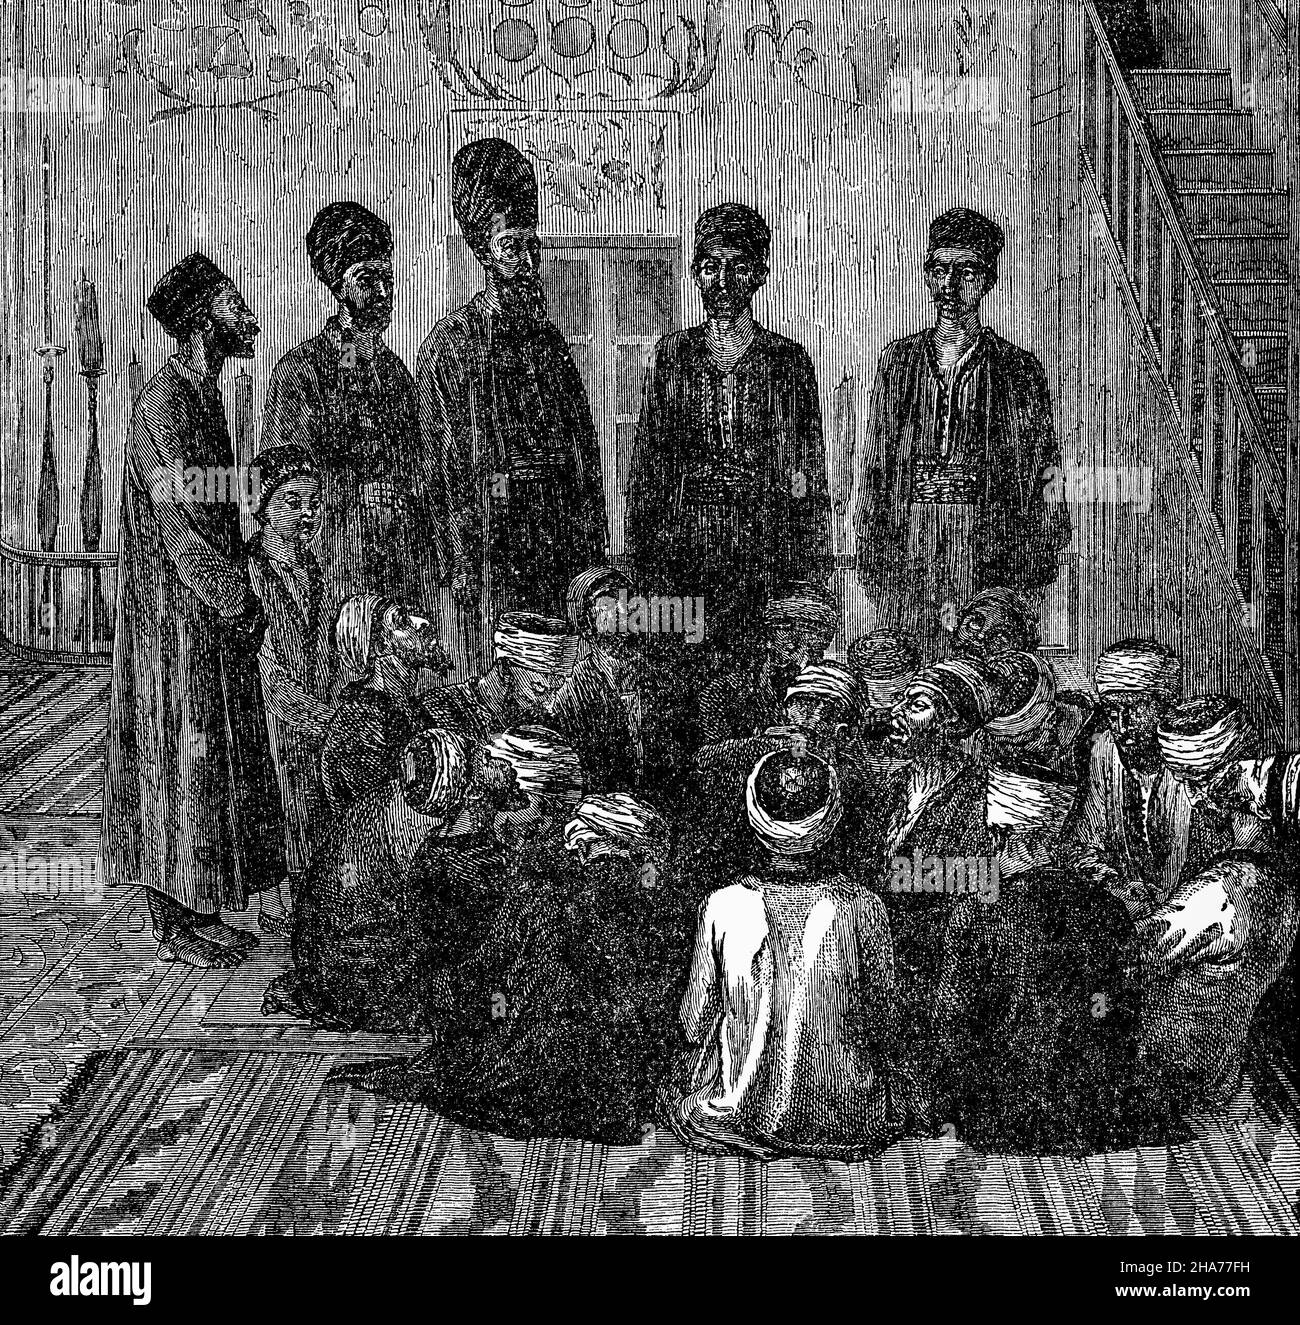 A late 19th Century illustration of a group of Dervishes Islamic members of a Sufi fraternity. The latter are mostly found in Persian and Turkish (Derviş), corresponding to the Arabic term faqir.Their focus is on the universal values of love and service, deserting the illusions of ego to reach God. In most Sufi orders, a dervish is known to practice dhikr through physical exertions or religious practices to attain the ecstatic trance to reach God. Stock Photo